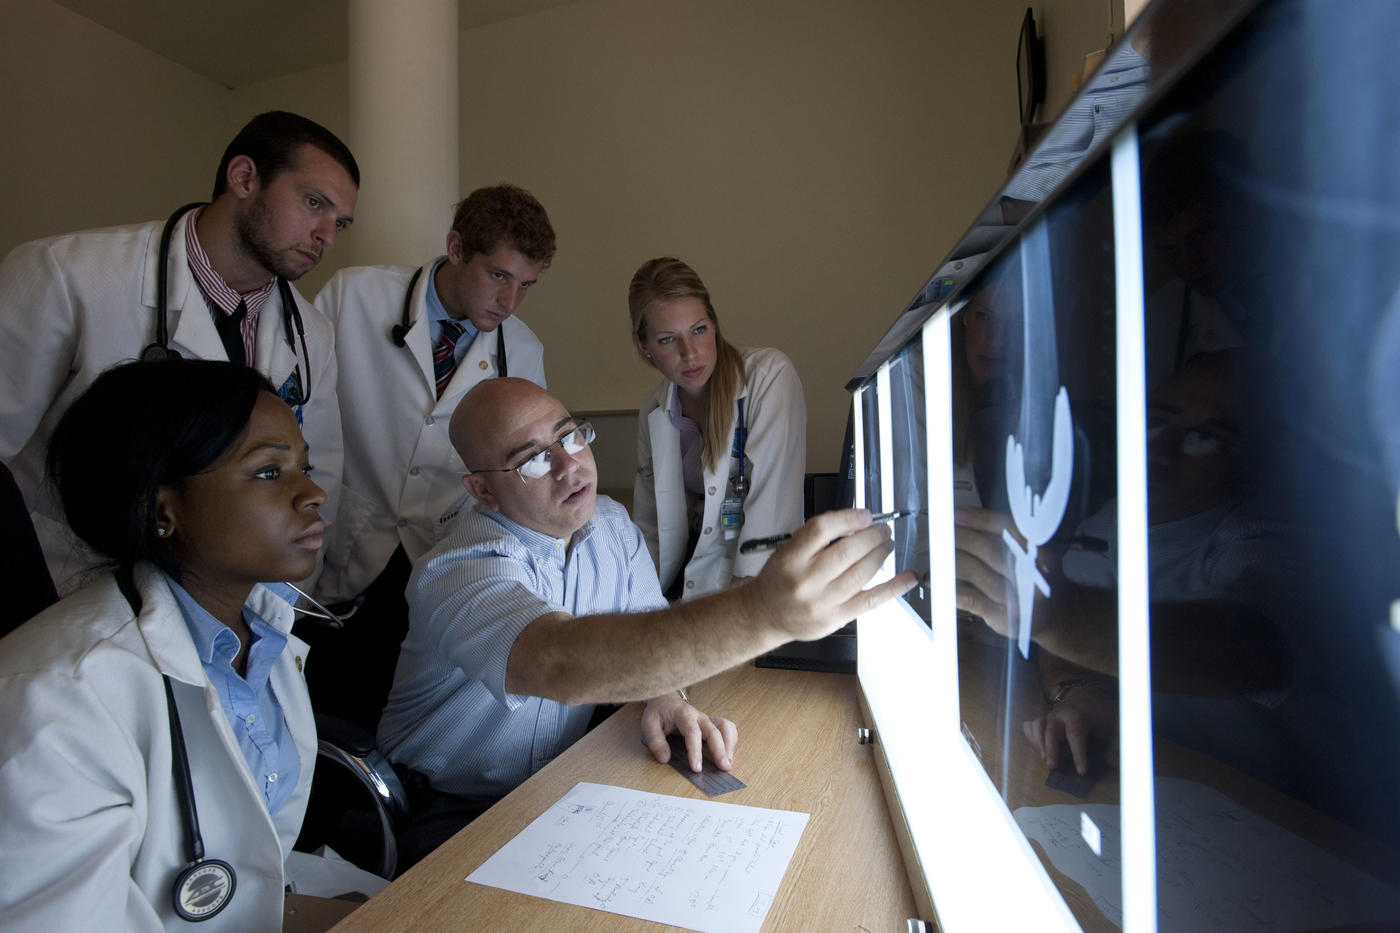 Students and faculty viewing intensifying screen